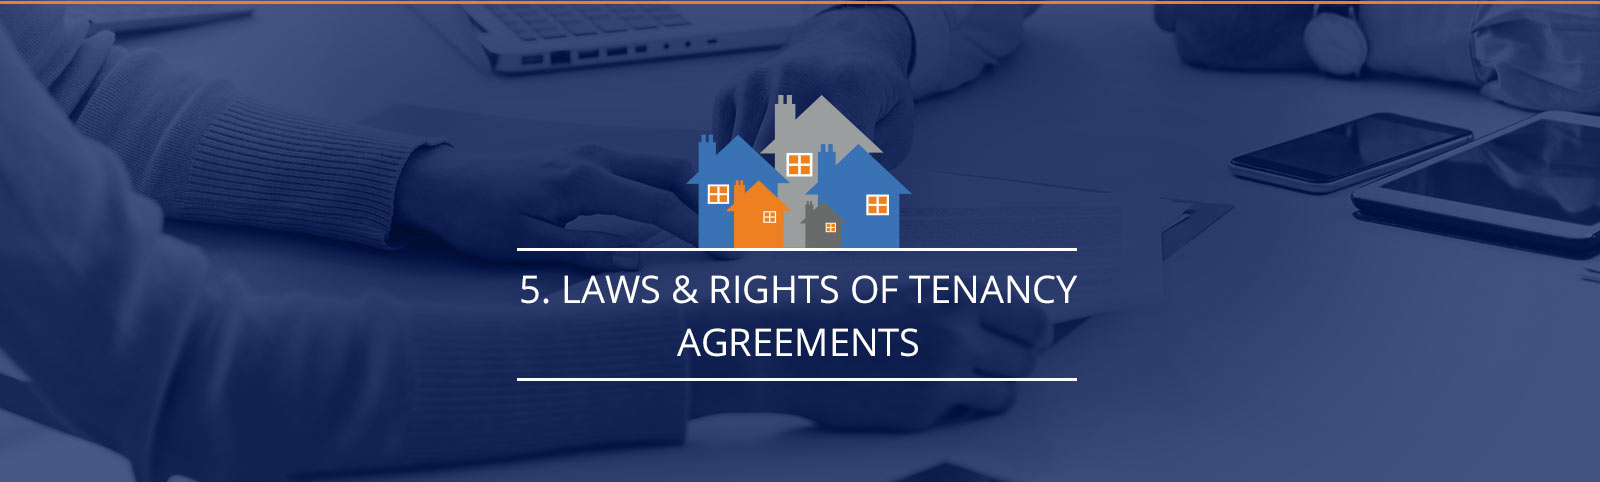 Laws and rights of tenancy agreements